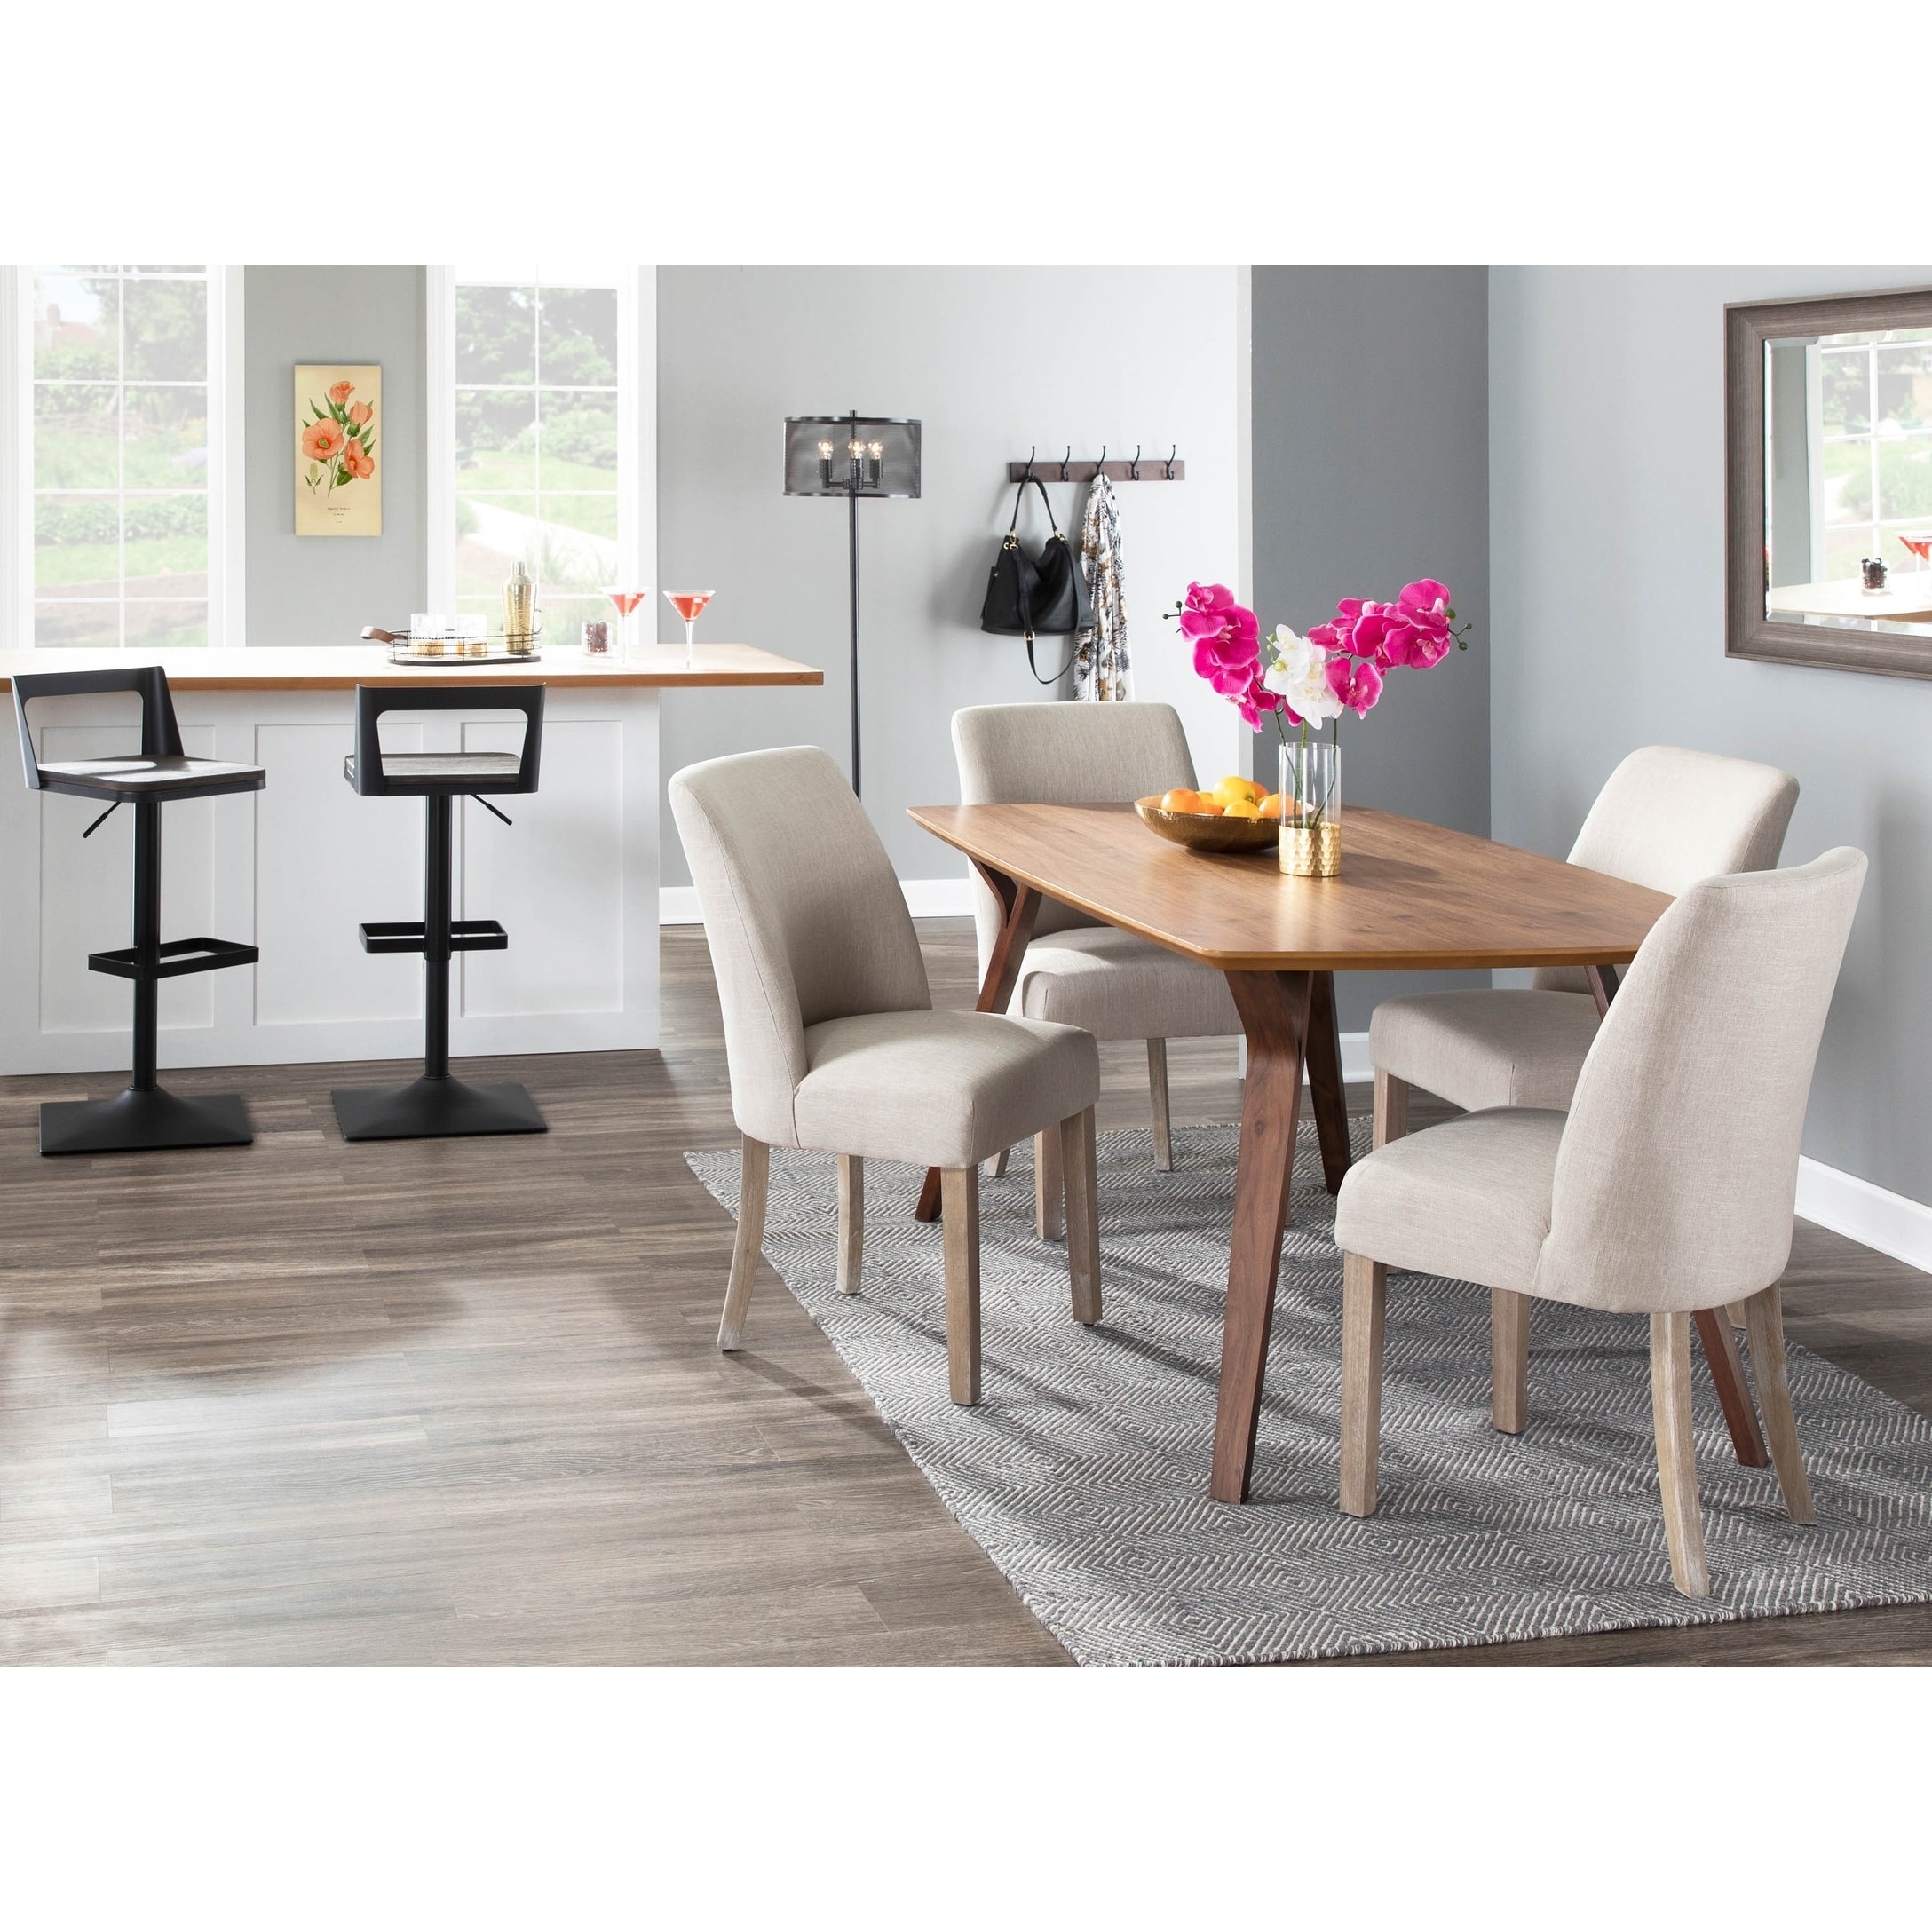 The Gray Barn Spelling Stream Farmhouse Upholstered Dining Chair With White Washed Wood Set Of 2 N A On Sale Overstock 25661081 Grey